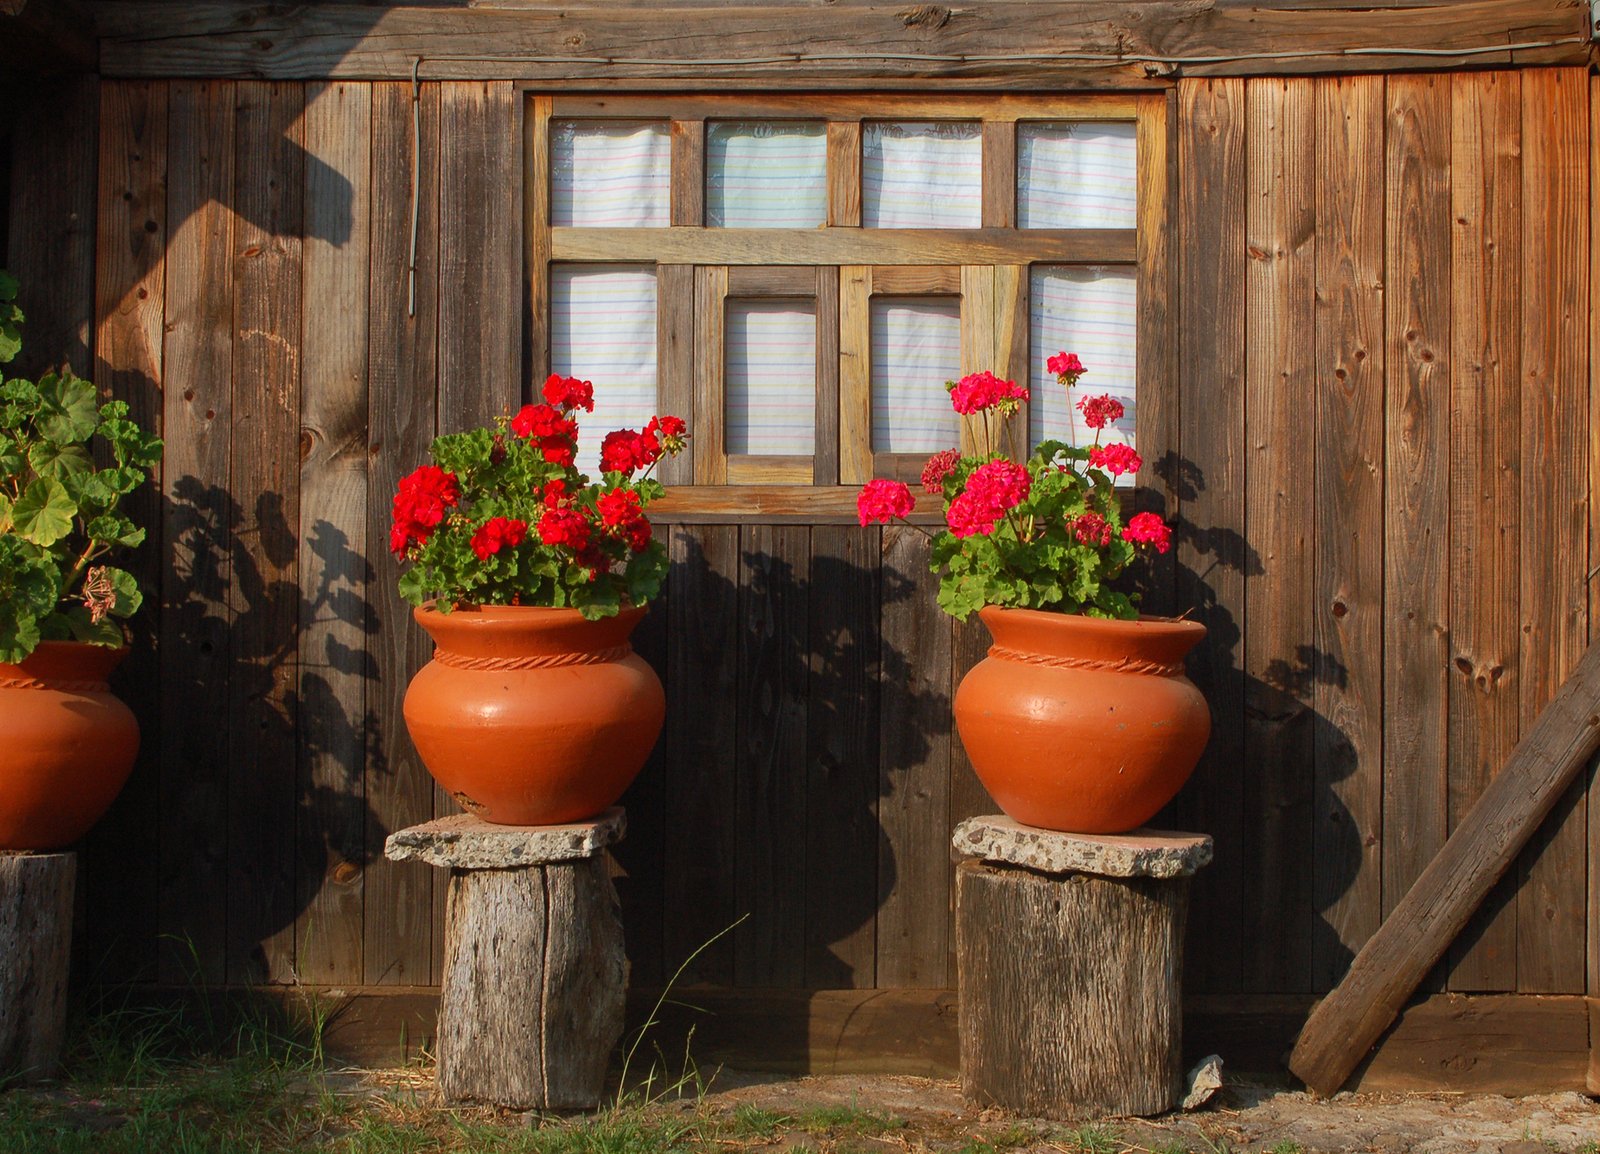 three tall pots on the ground with flowers in them